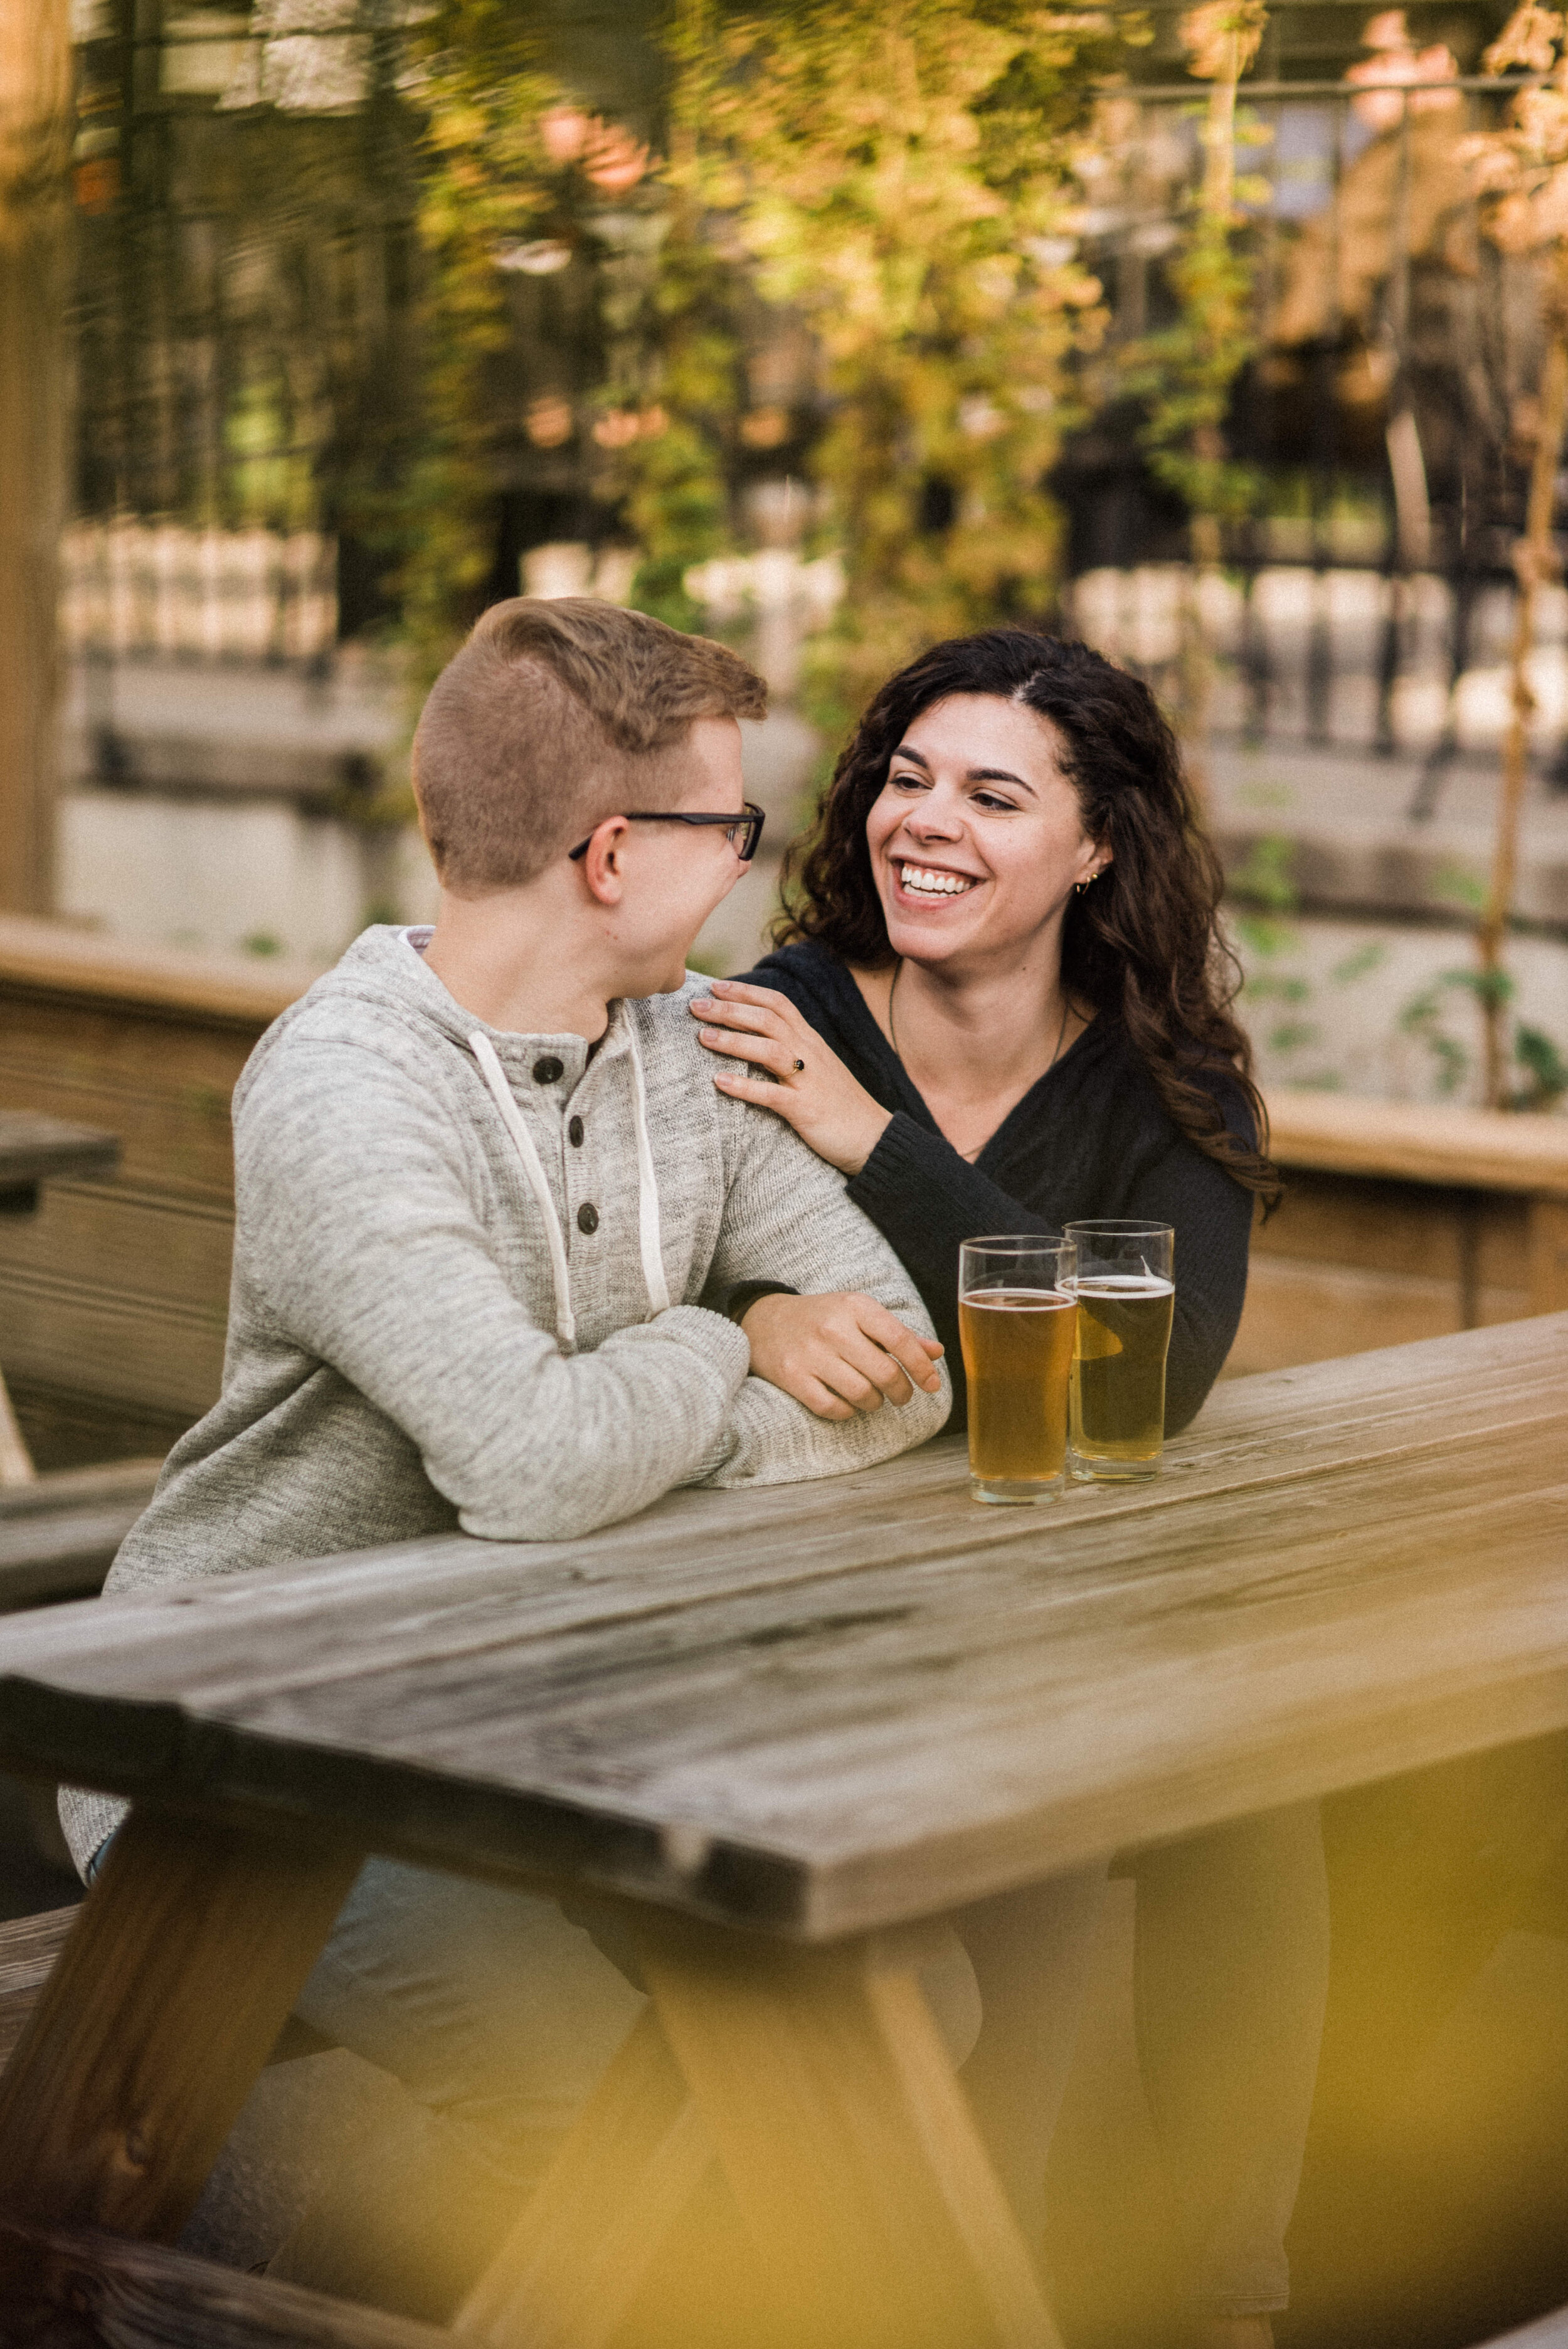 Dayton Beer Company Engagement Sessions | Dayton, OH